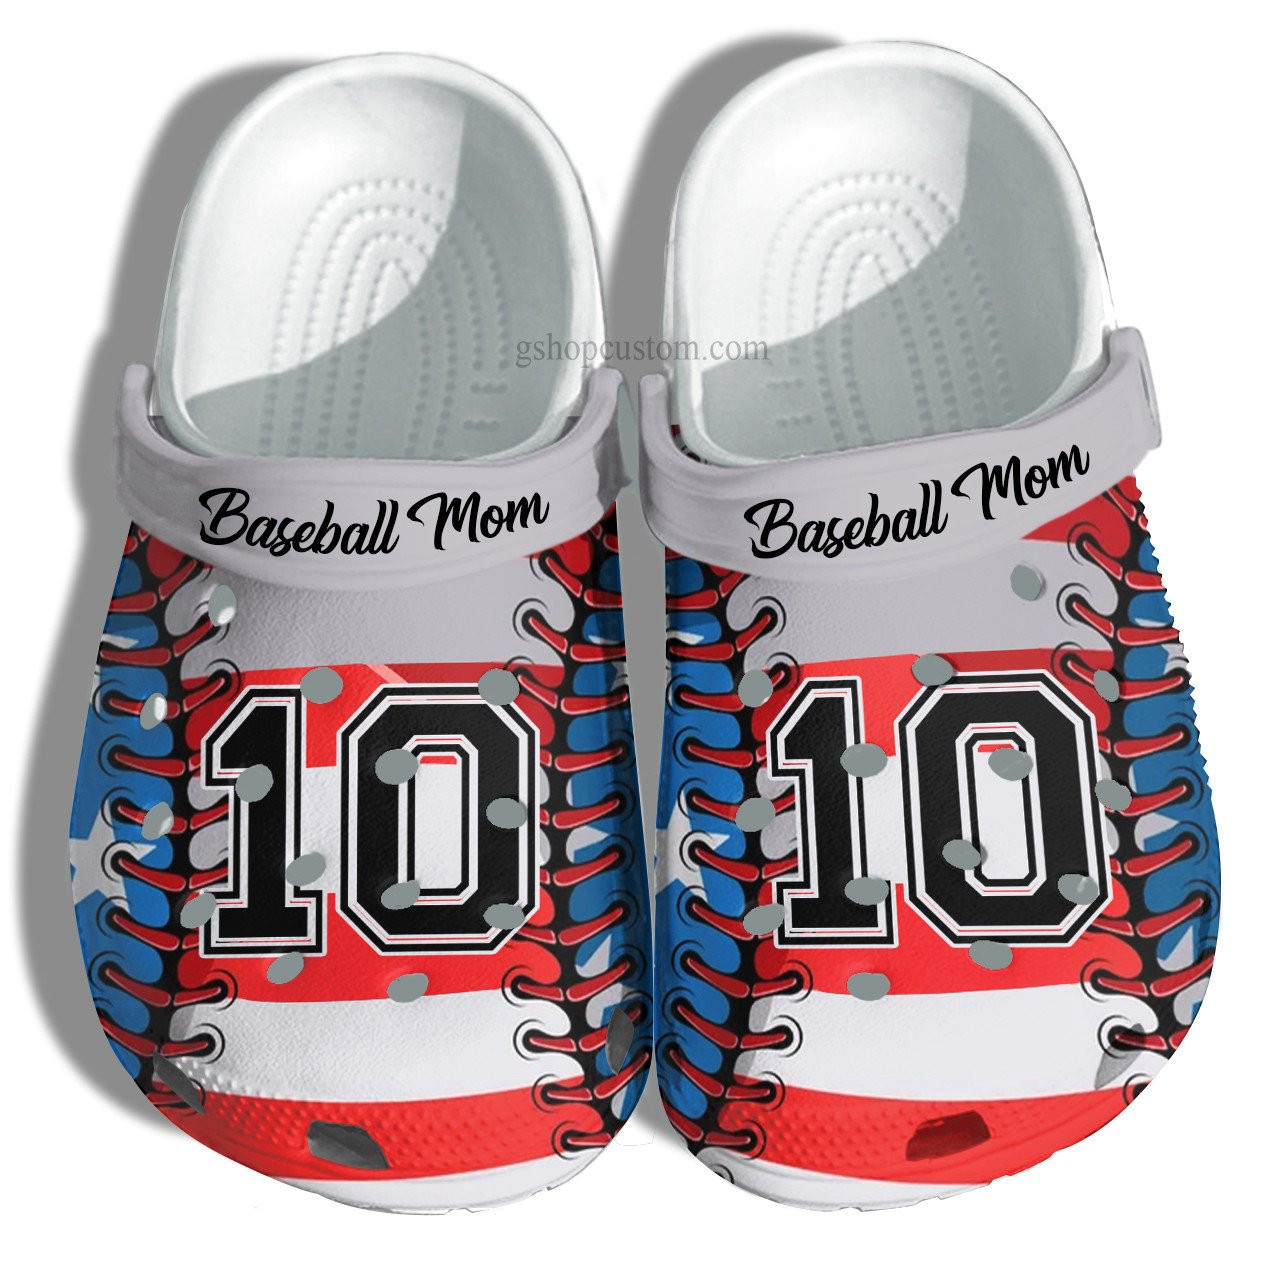 Baseball America Flag Croc Shoes Customize Name Number Player- Baseball 4Th Of July Crocs Shoes Gift Birthday Son